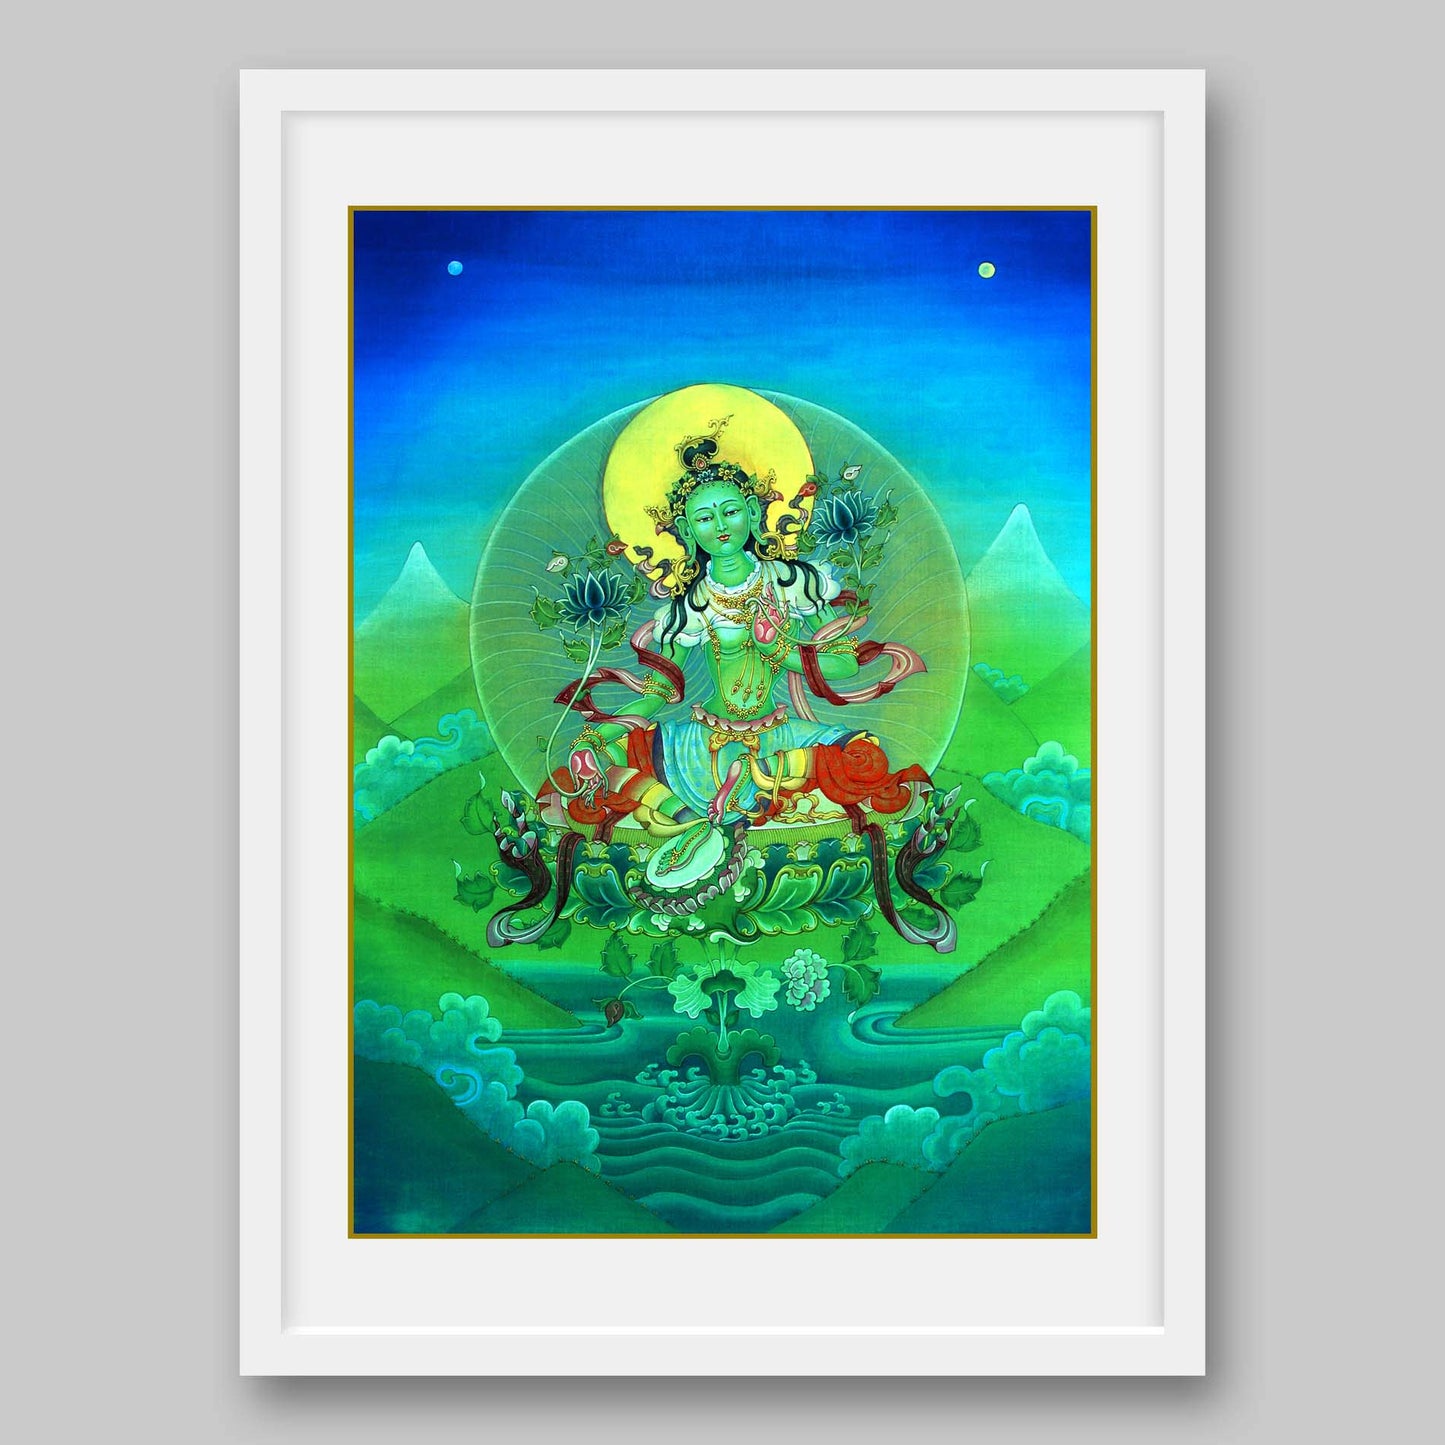 Green Tara – The Female Boddhisatva and Remover of Fear- High Quality Print of Artwork by Pieter Weltevrede